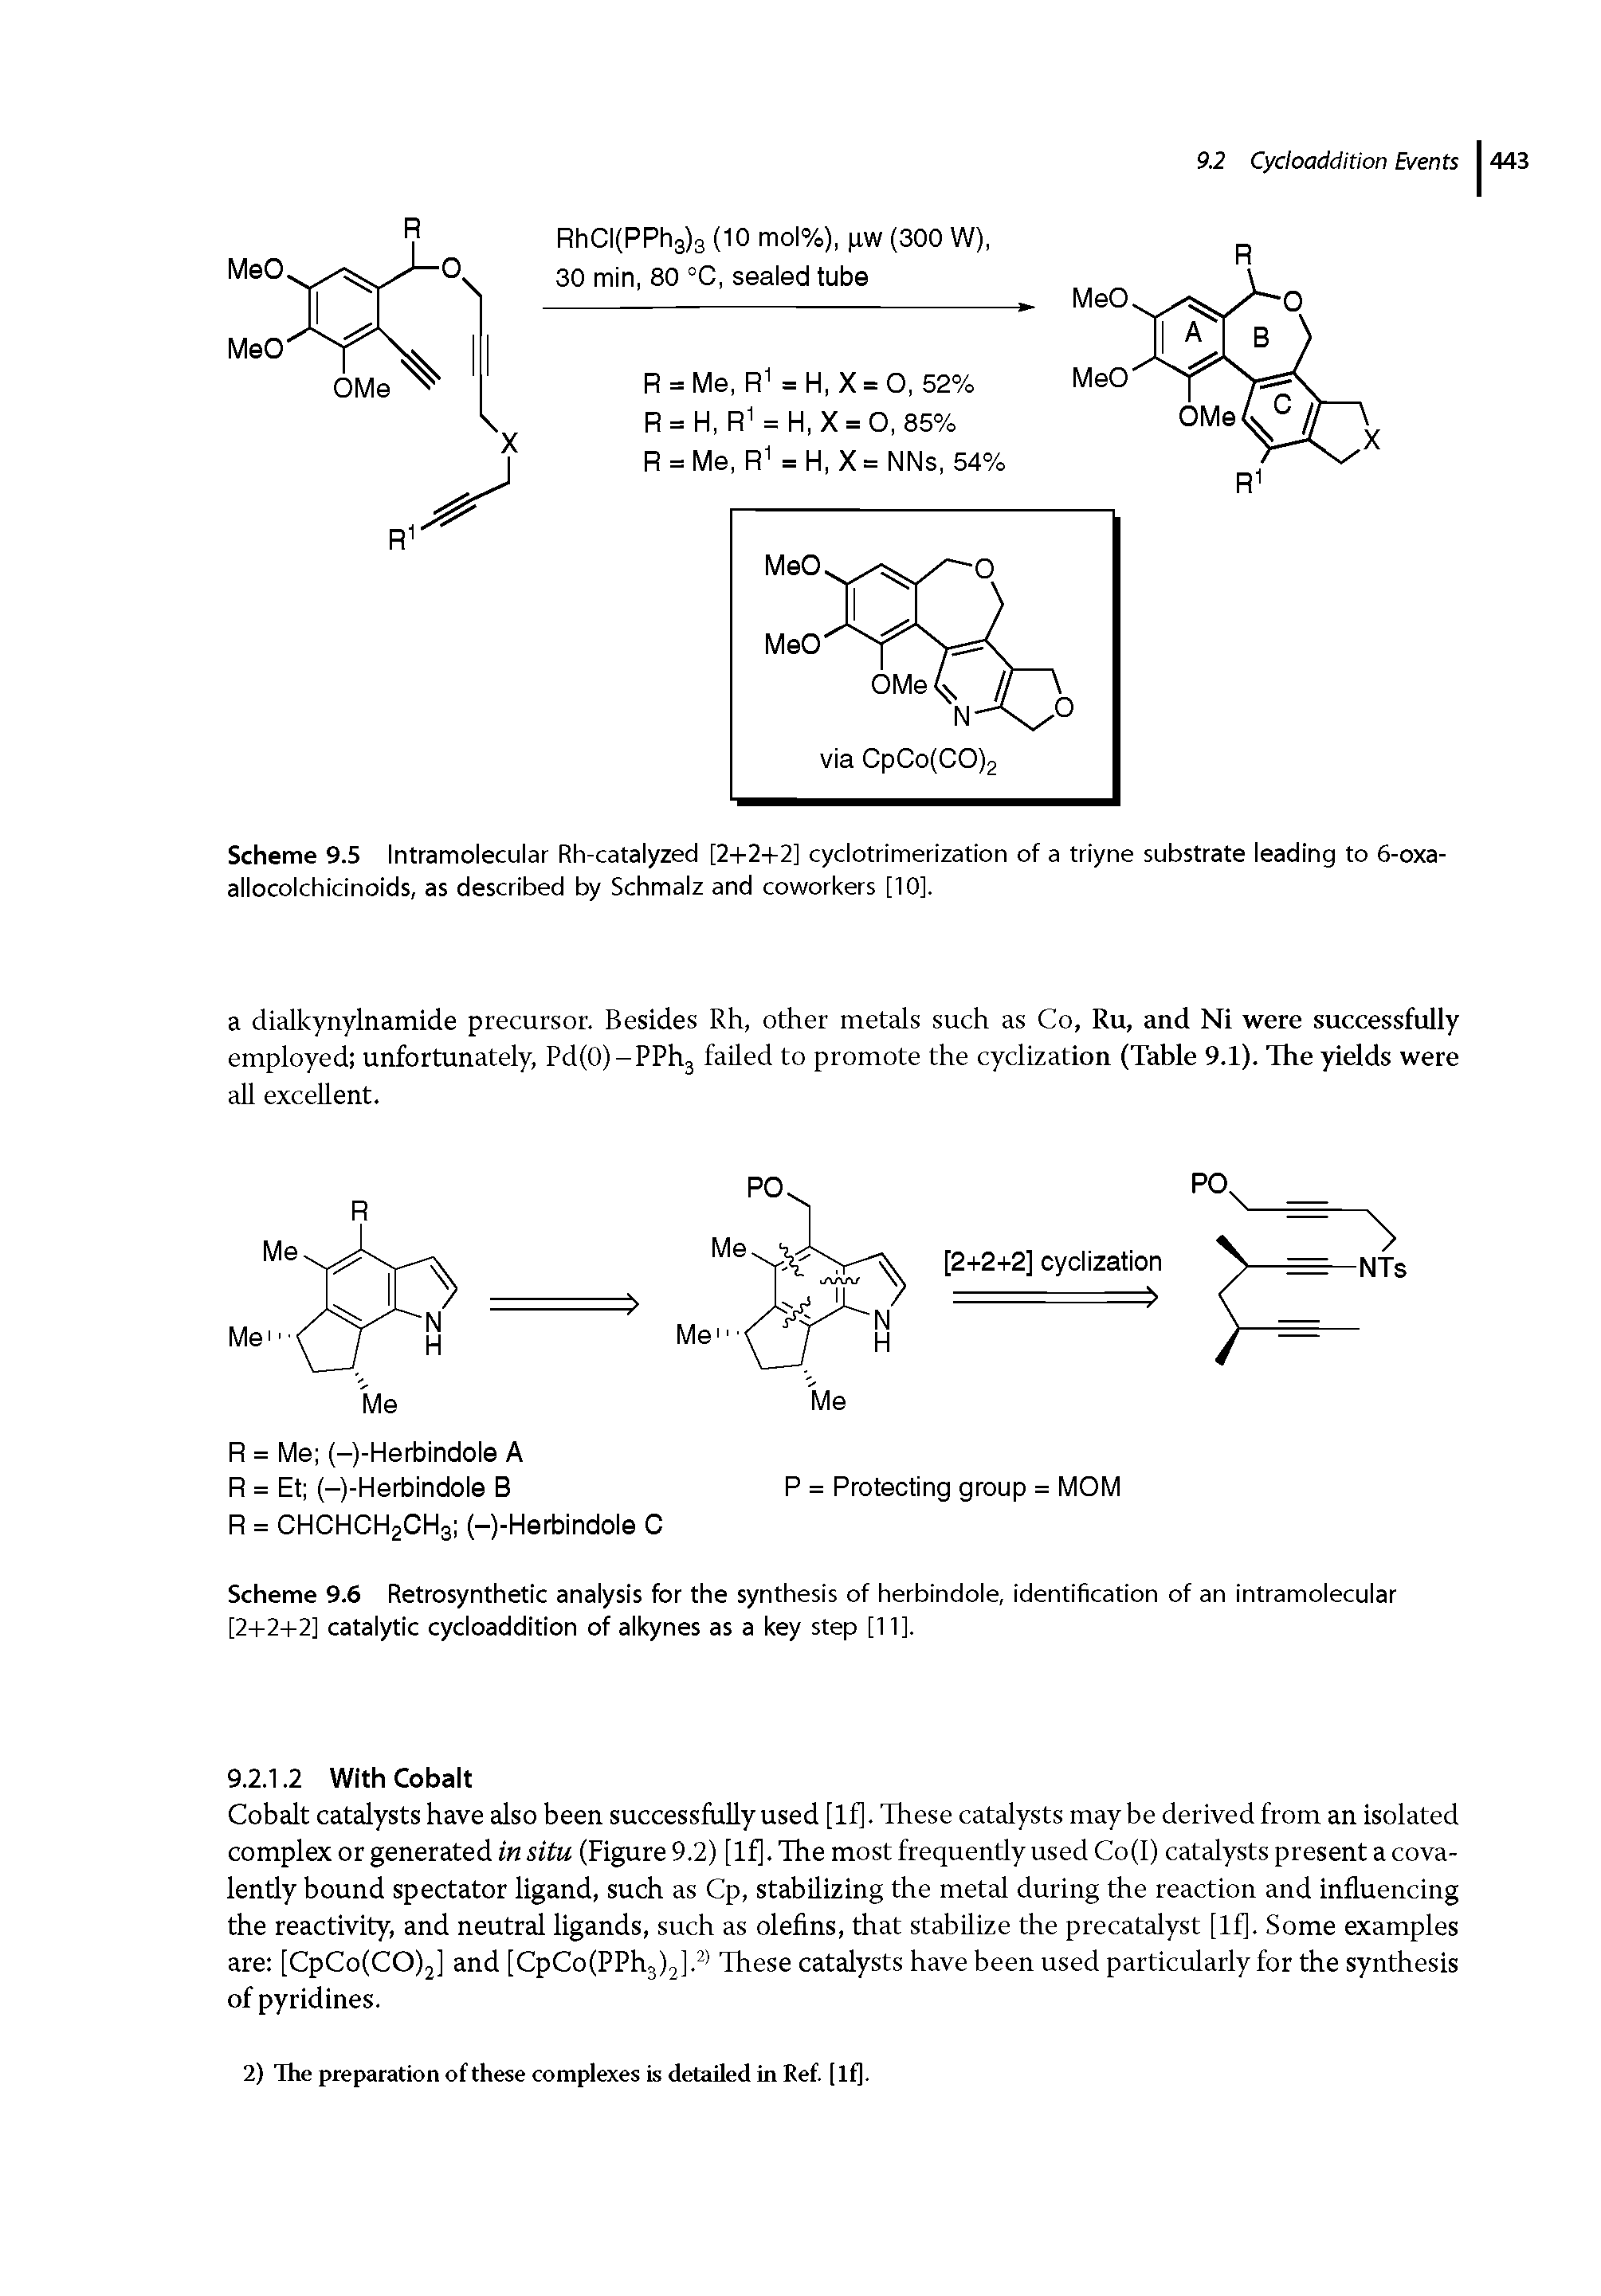 Scheme 9.6 Retrosynthetic analysis for the synthesis of herbindole, identification of an intramolecular [2+2+2] catalytic cycloaddition of alkynes as a key step [11].